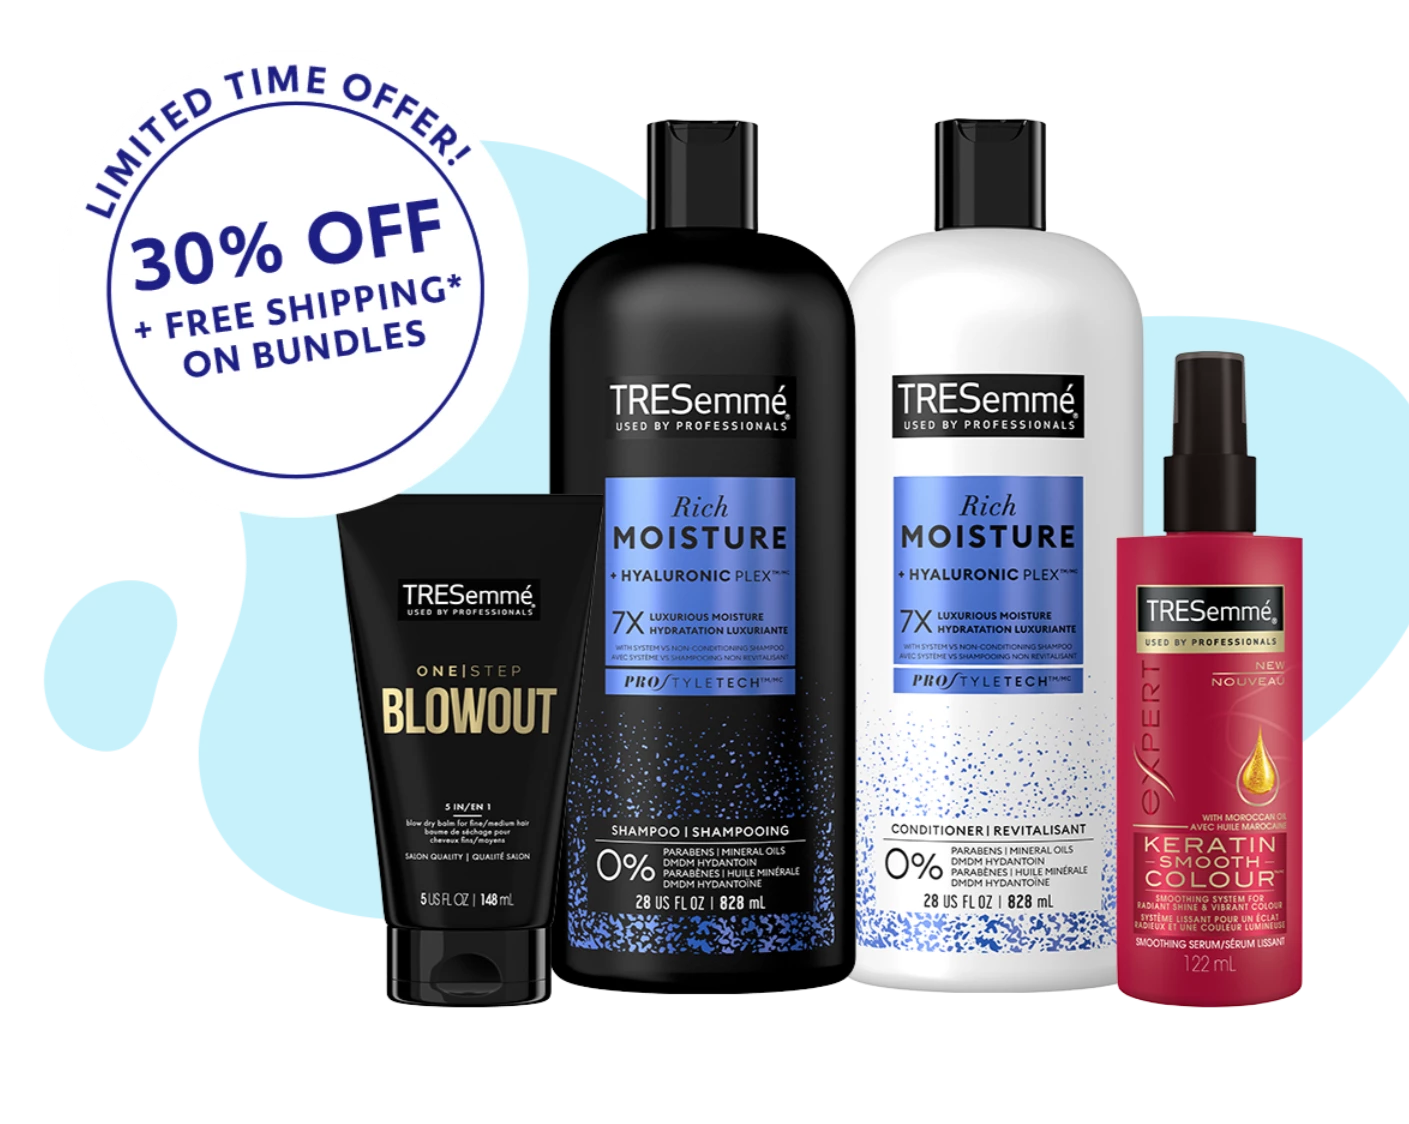 Showing the 4 included products alongside a call to action "Limited time offer: 30% off plus free shipping (for orders in Ontario) on bundles!"